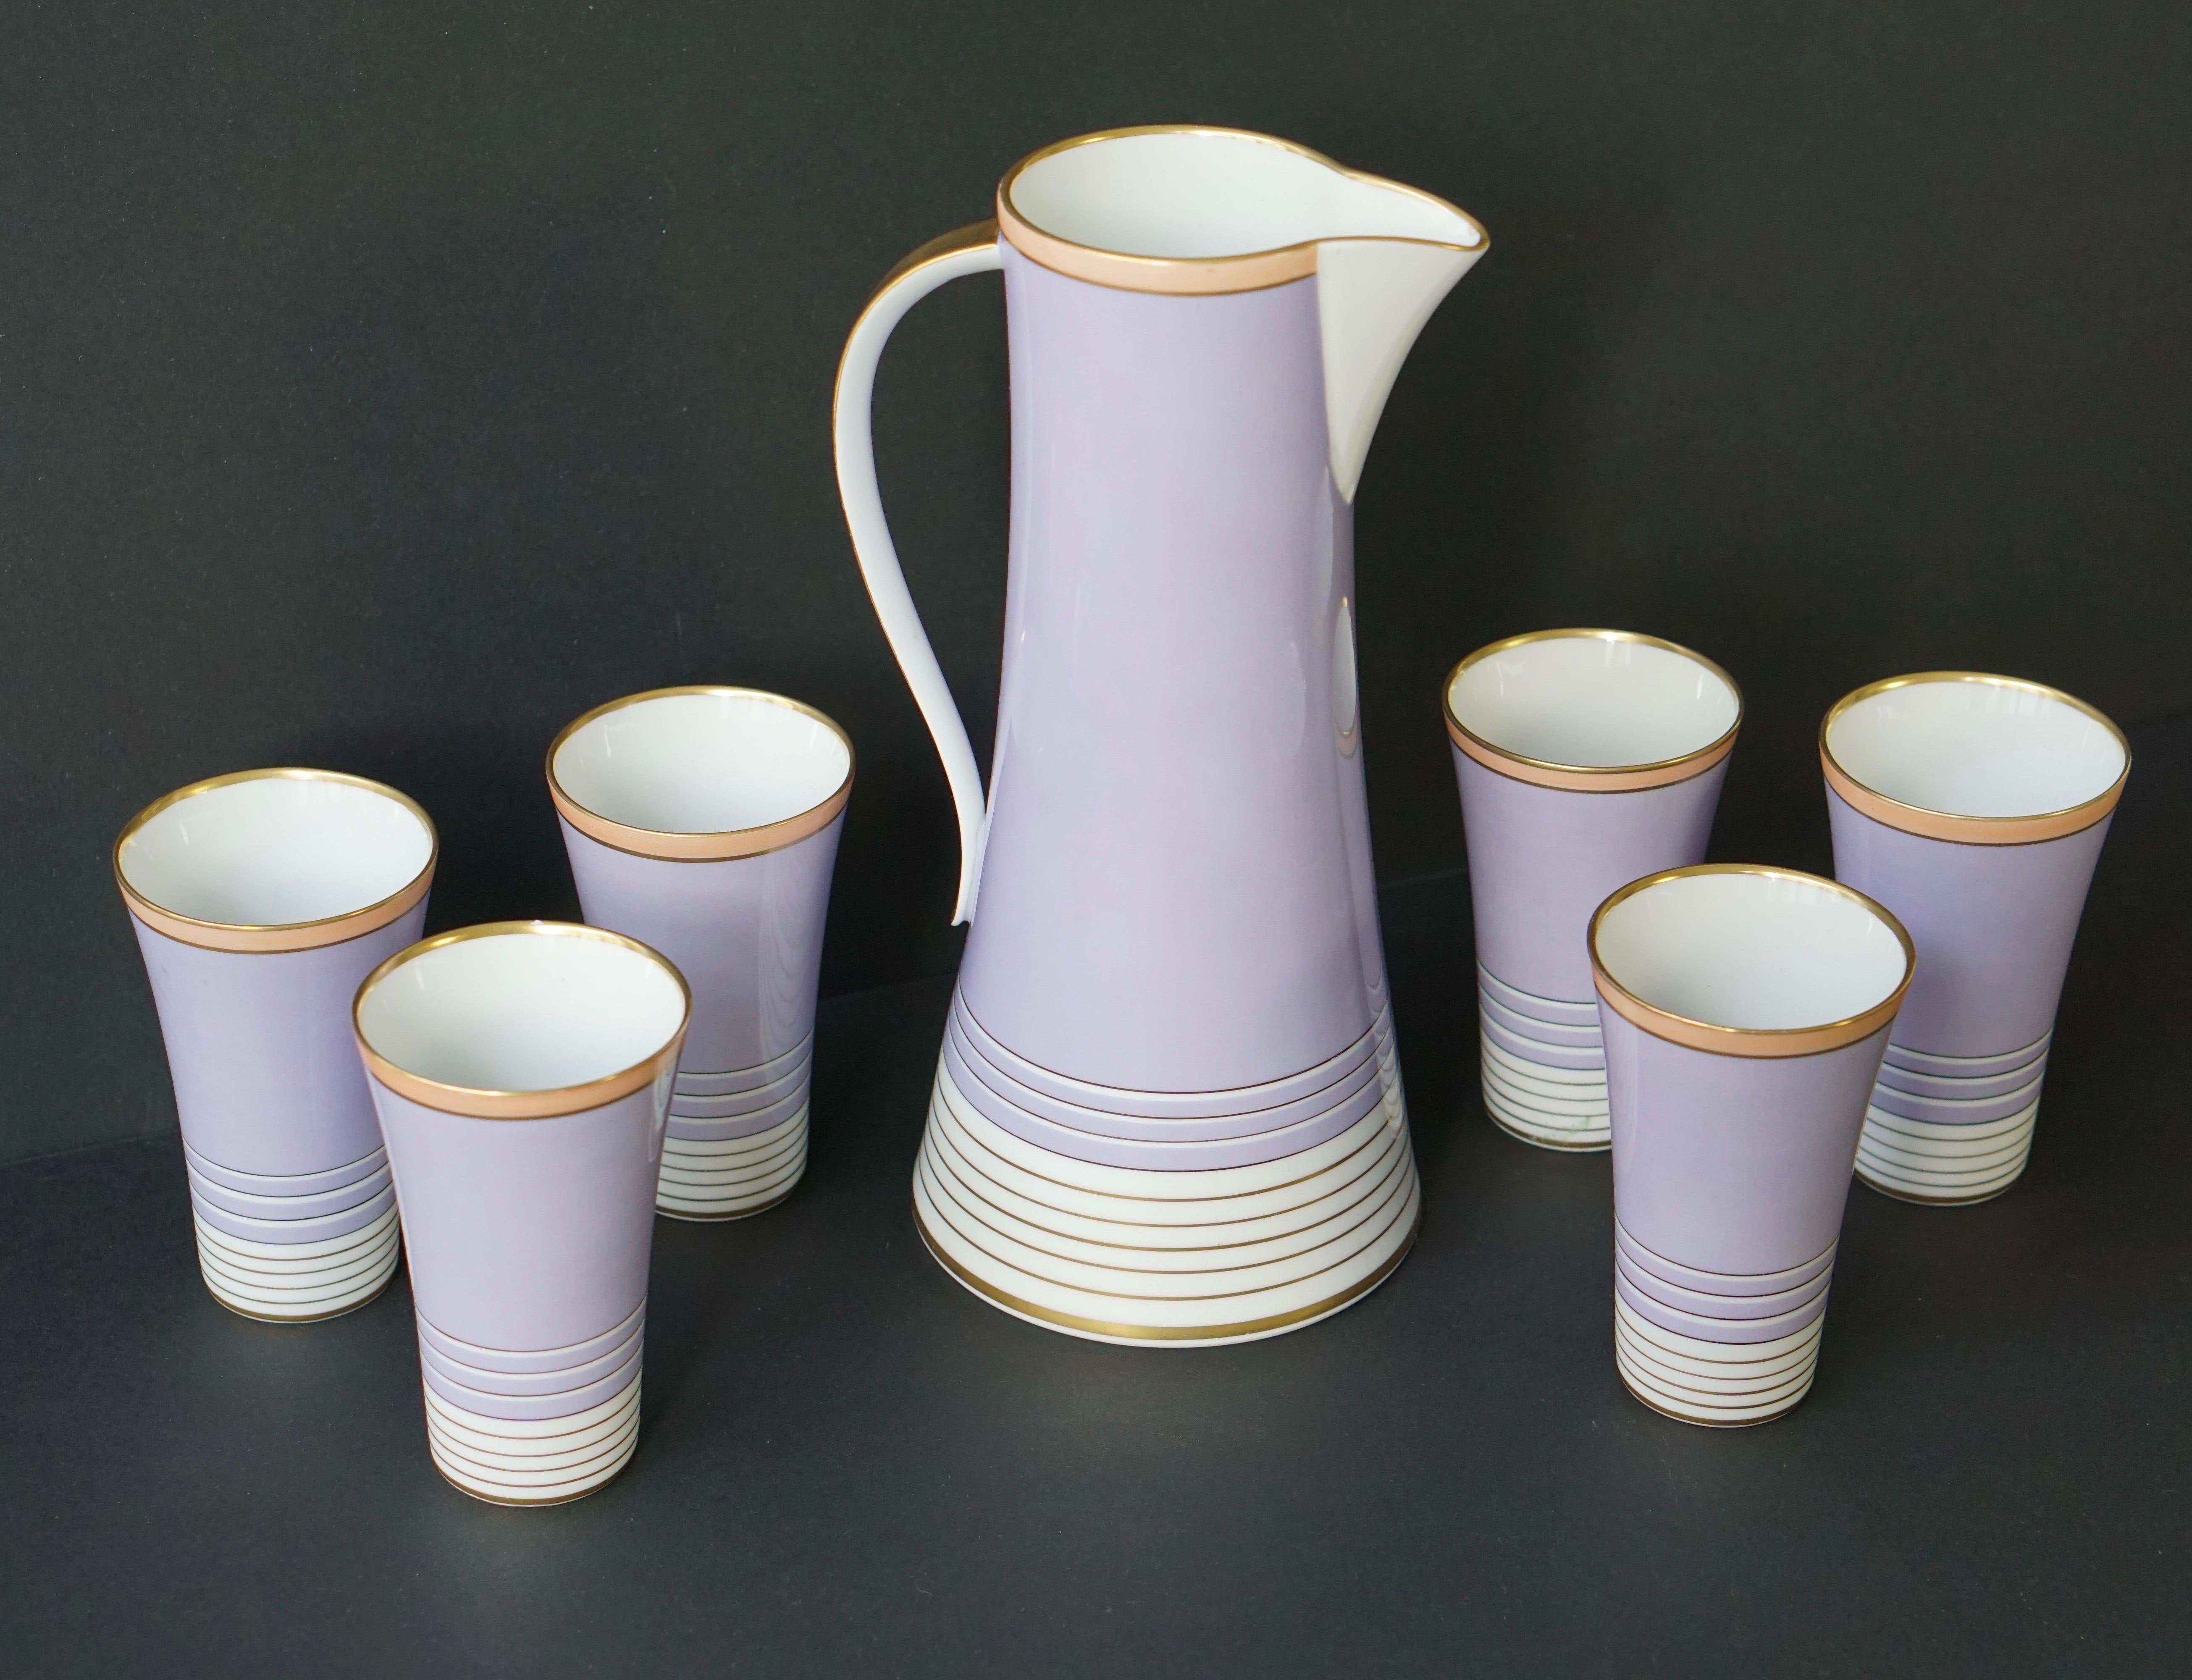 Drinking set composed of a jug and six glasses in violet, white and gilt. The jug and glasses are signed, Weimar porzellein, Germany, Romeo.
Jug dimension: Height 26 cm, depth 12cm, width 14 cm.
Glass dimension: Height 11cm, depth 7 cm.
    